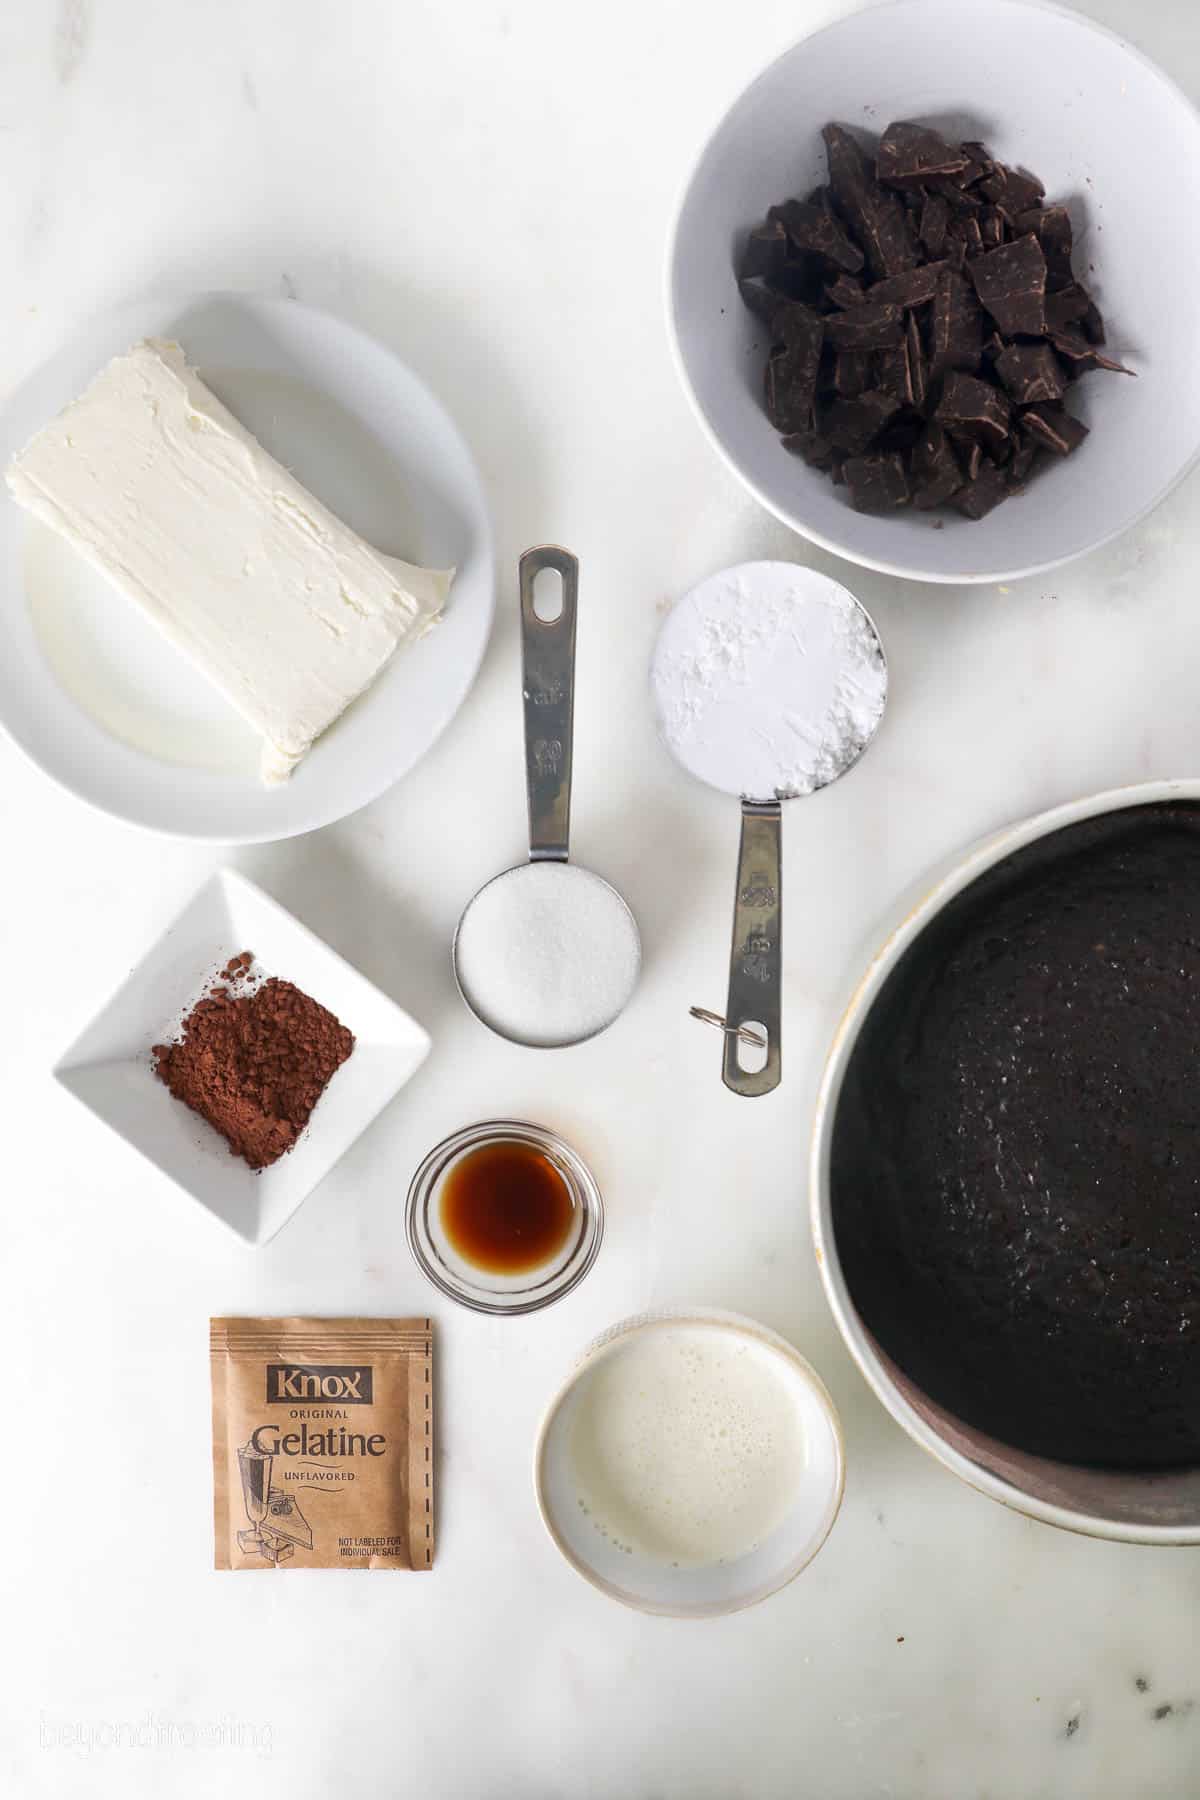 Ingredients for a Chocolate Mousse cake laid out on the table